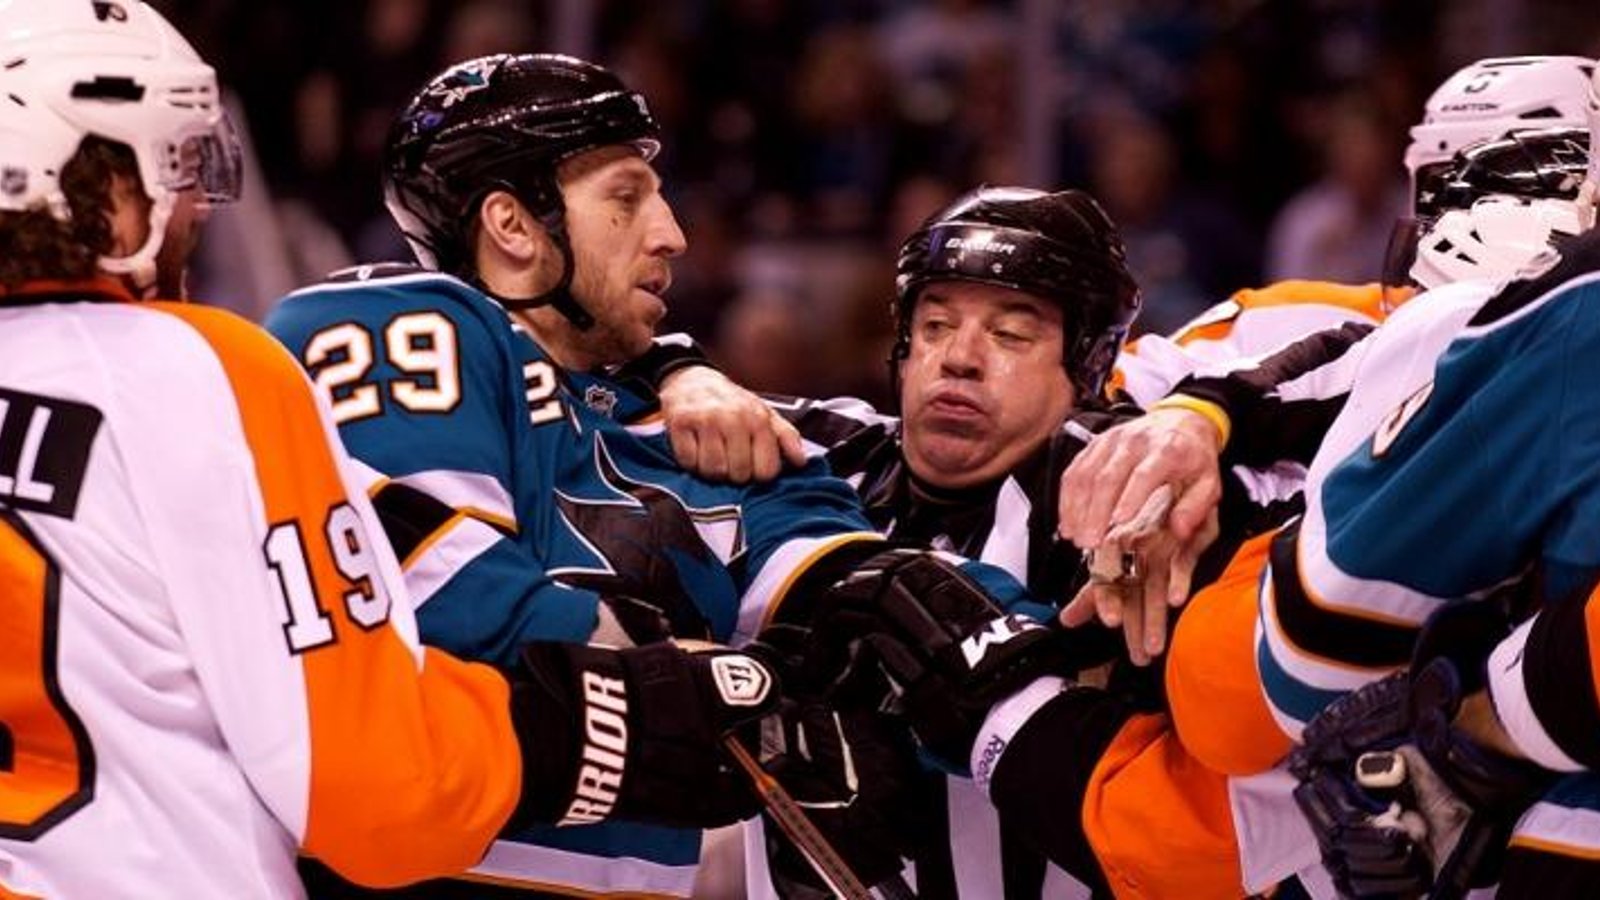 Forced to retire due to concussions, former tough guy to take on NHL coaching role.